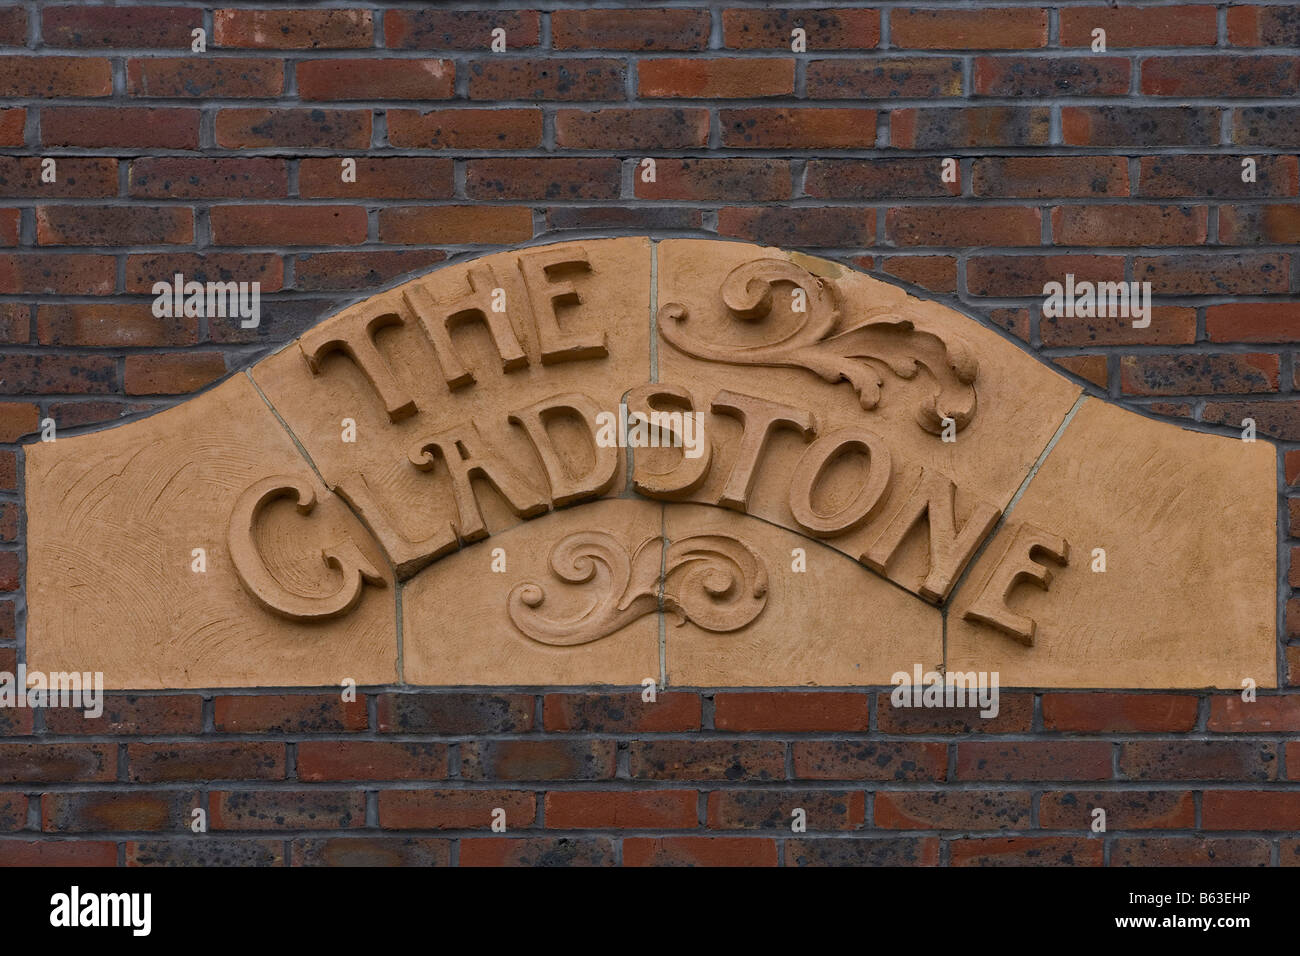 Stoke on Trent Gladstone Pottery Museum open in 1850 Derbyshire the Midlands UK United Kingdom Great Britain Stock Photo